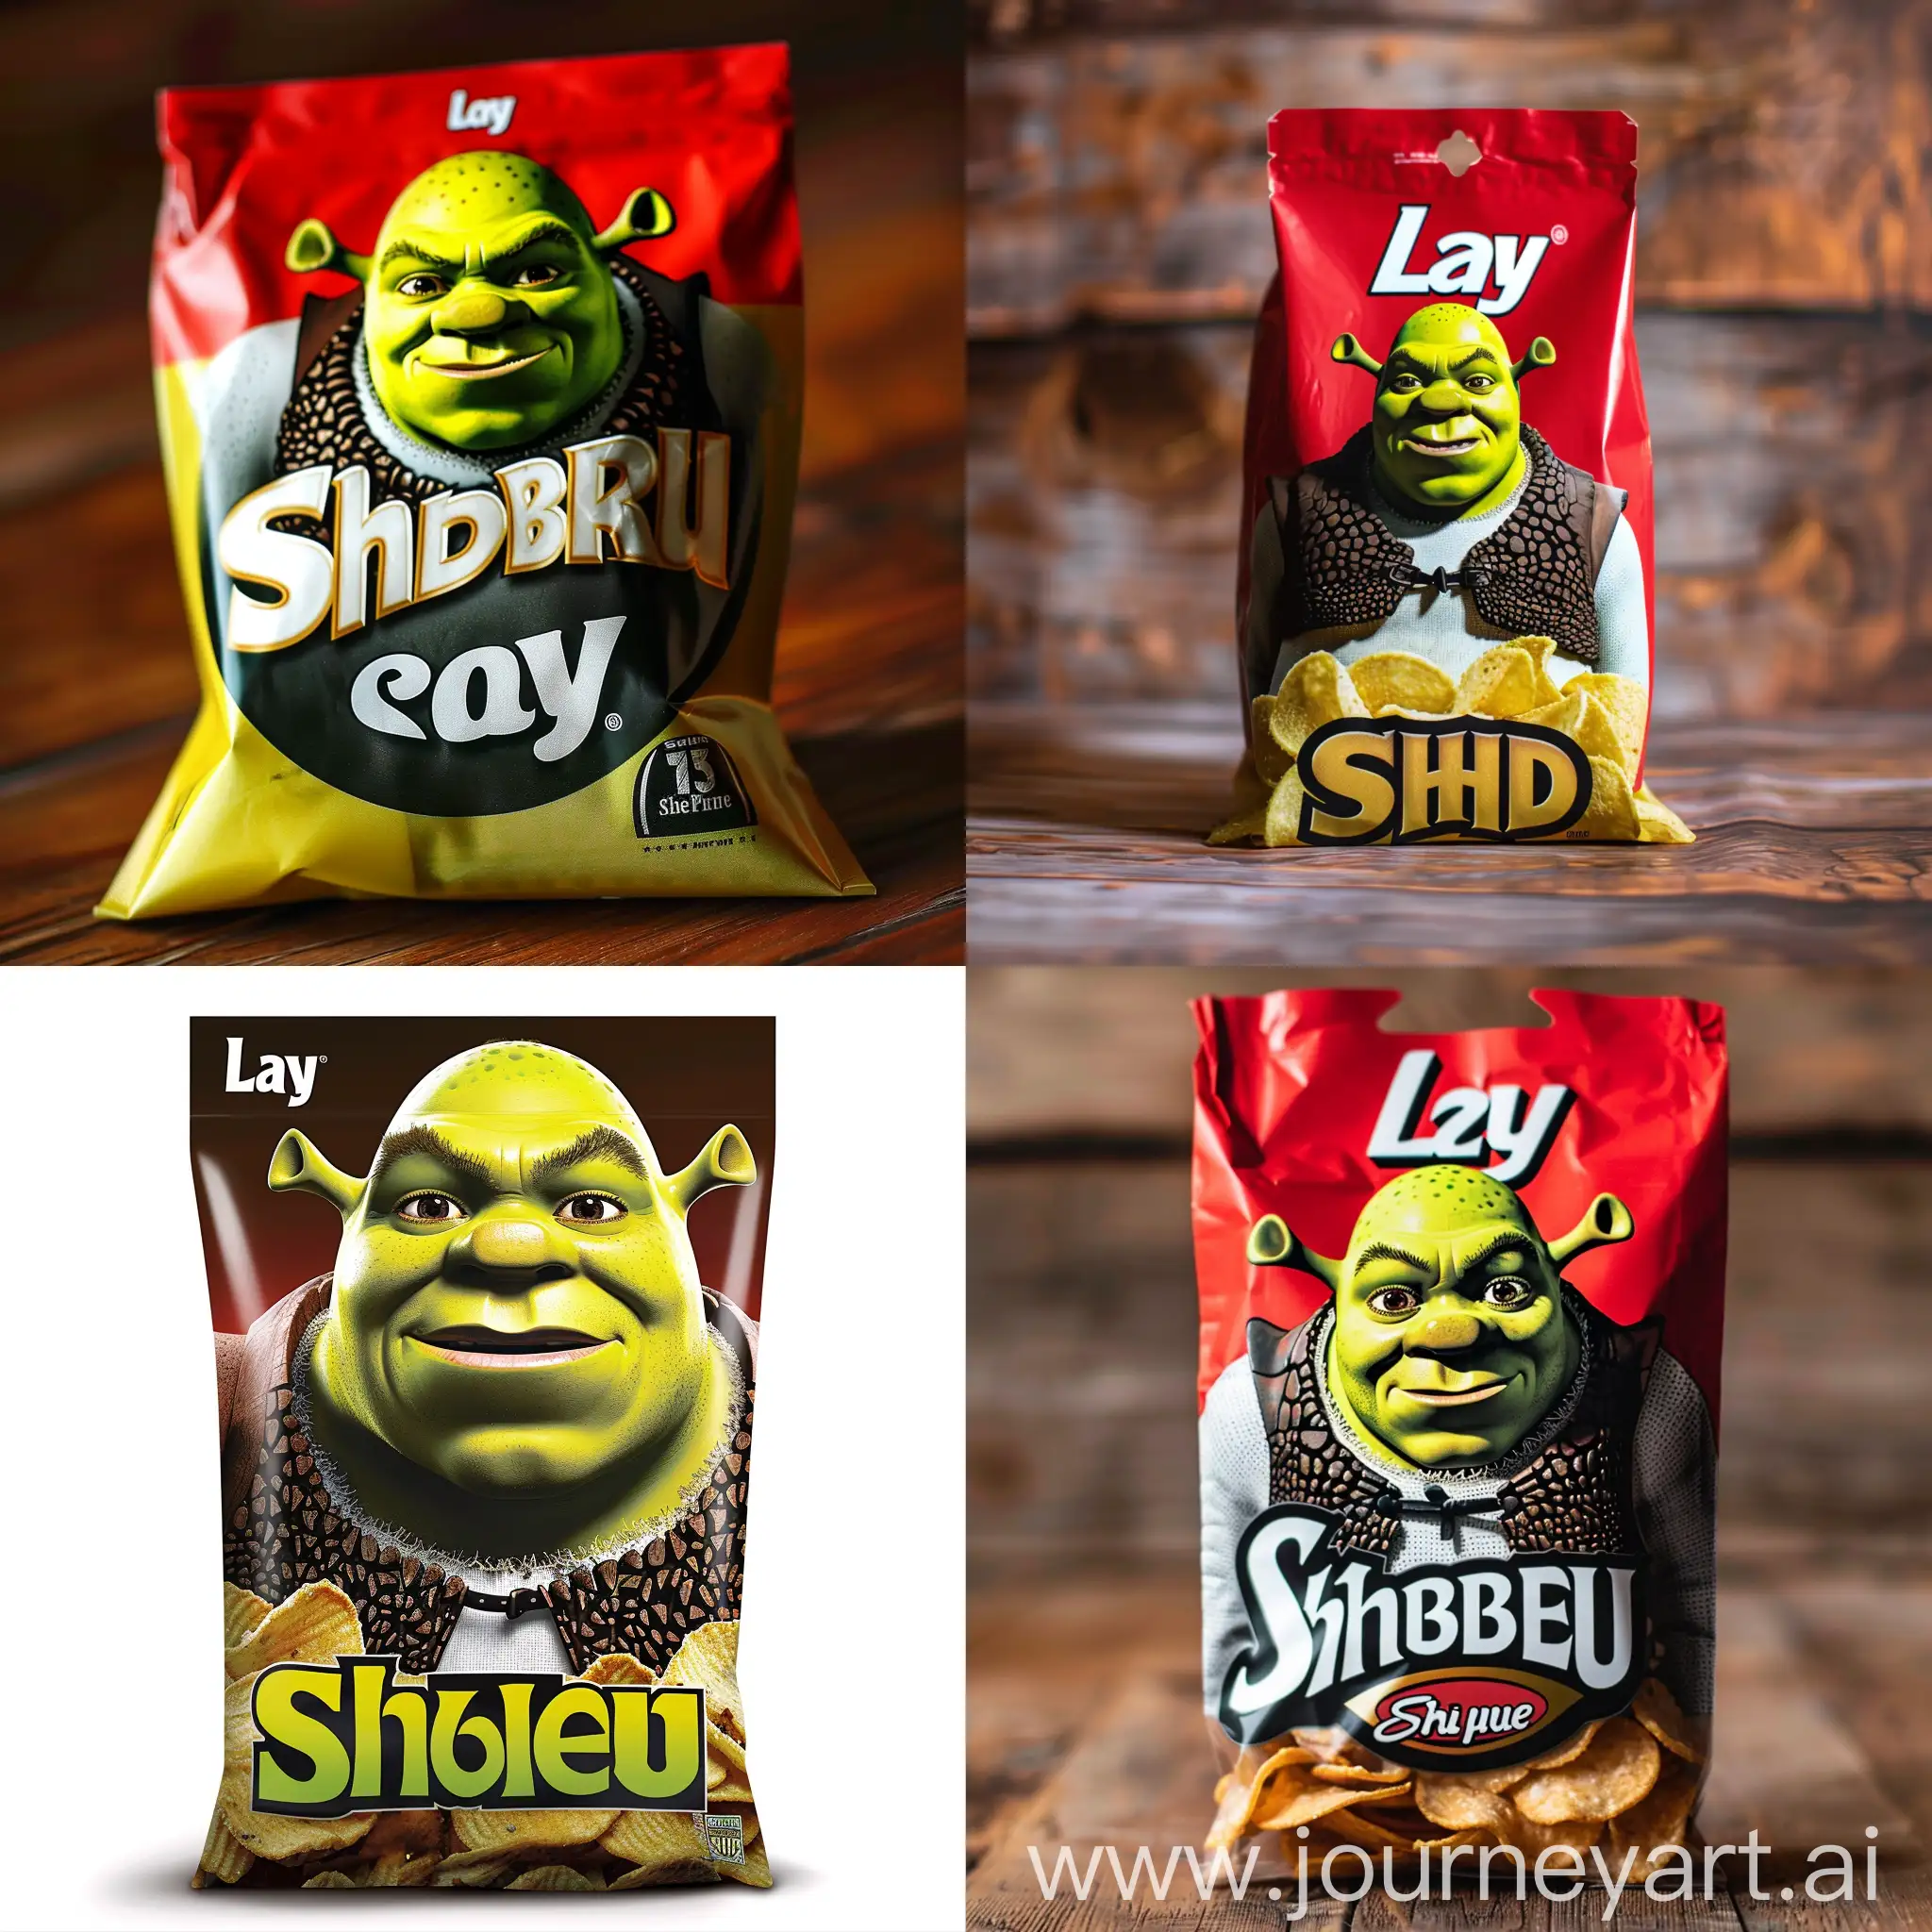 Shrek-Flavored-Lays-Chips-Quirky-Snack-with-Shrek-Character-on-Bag